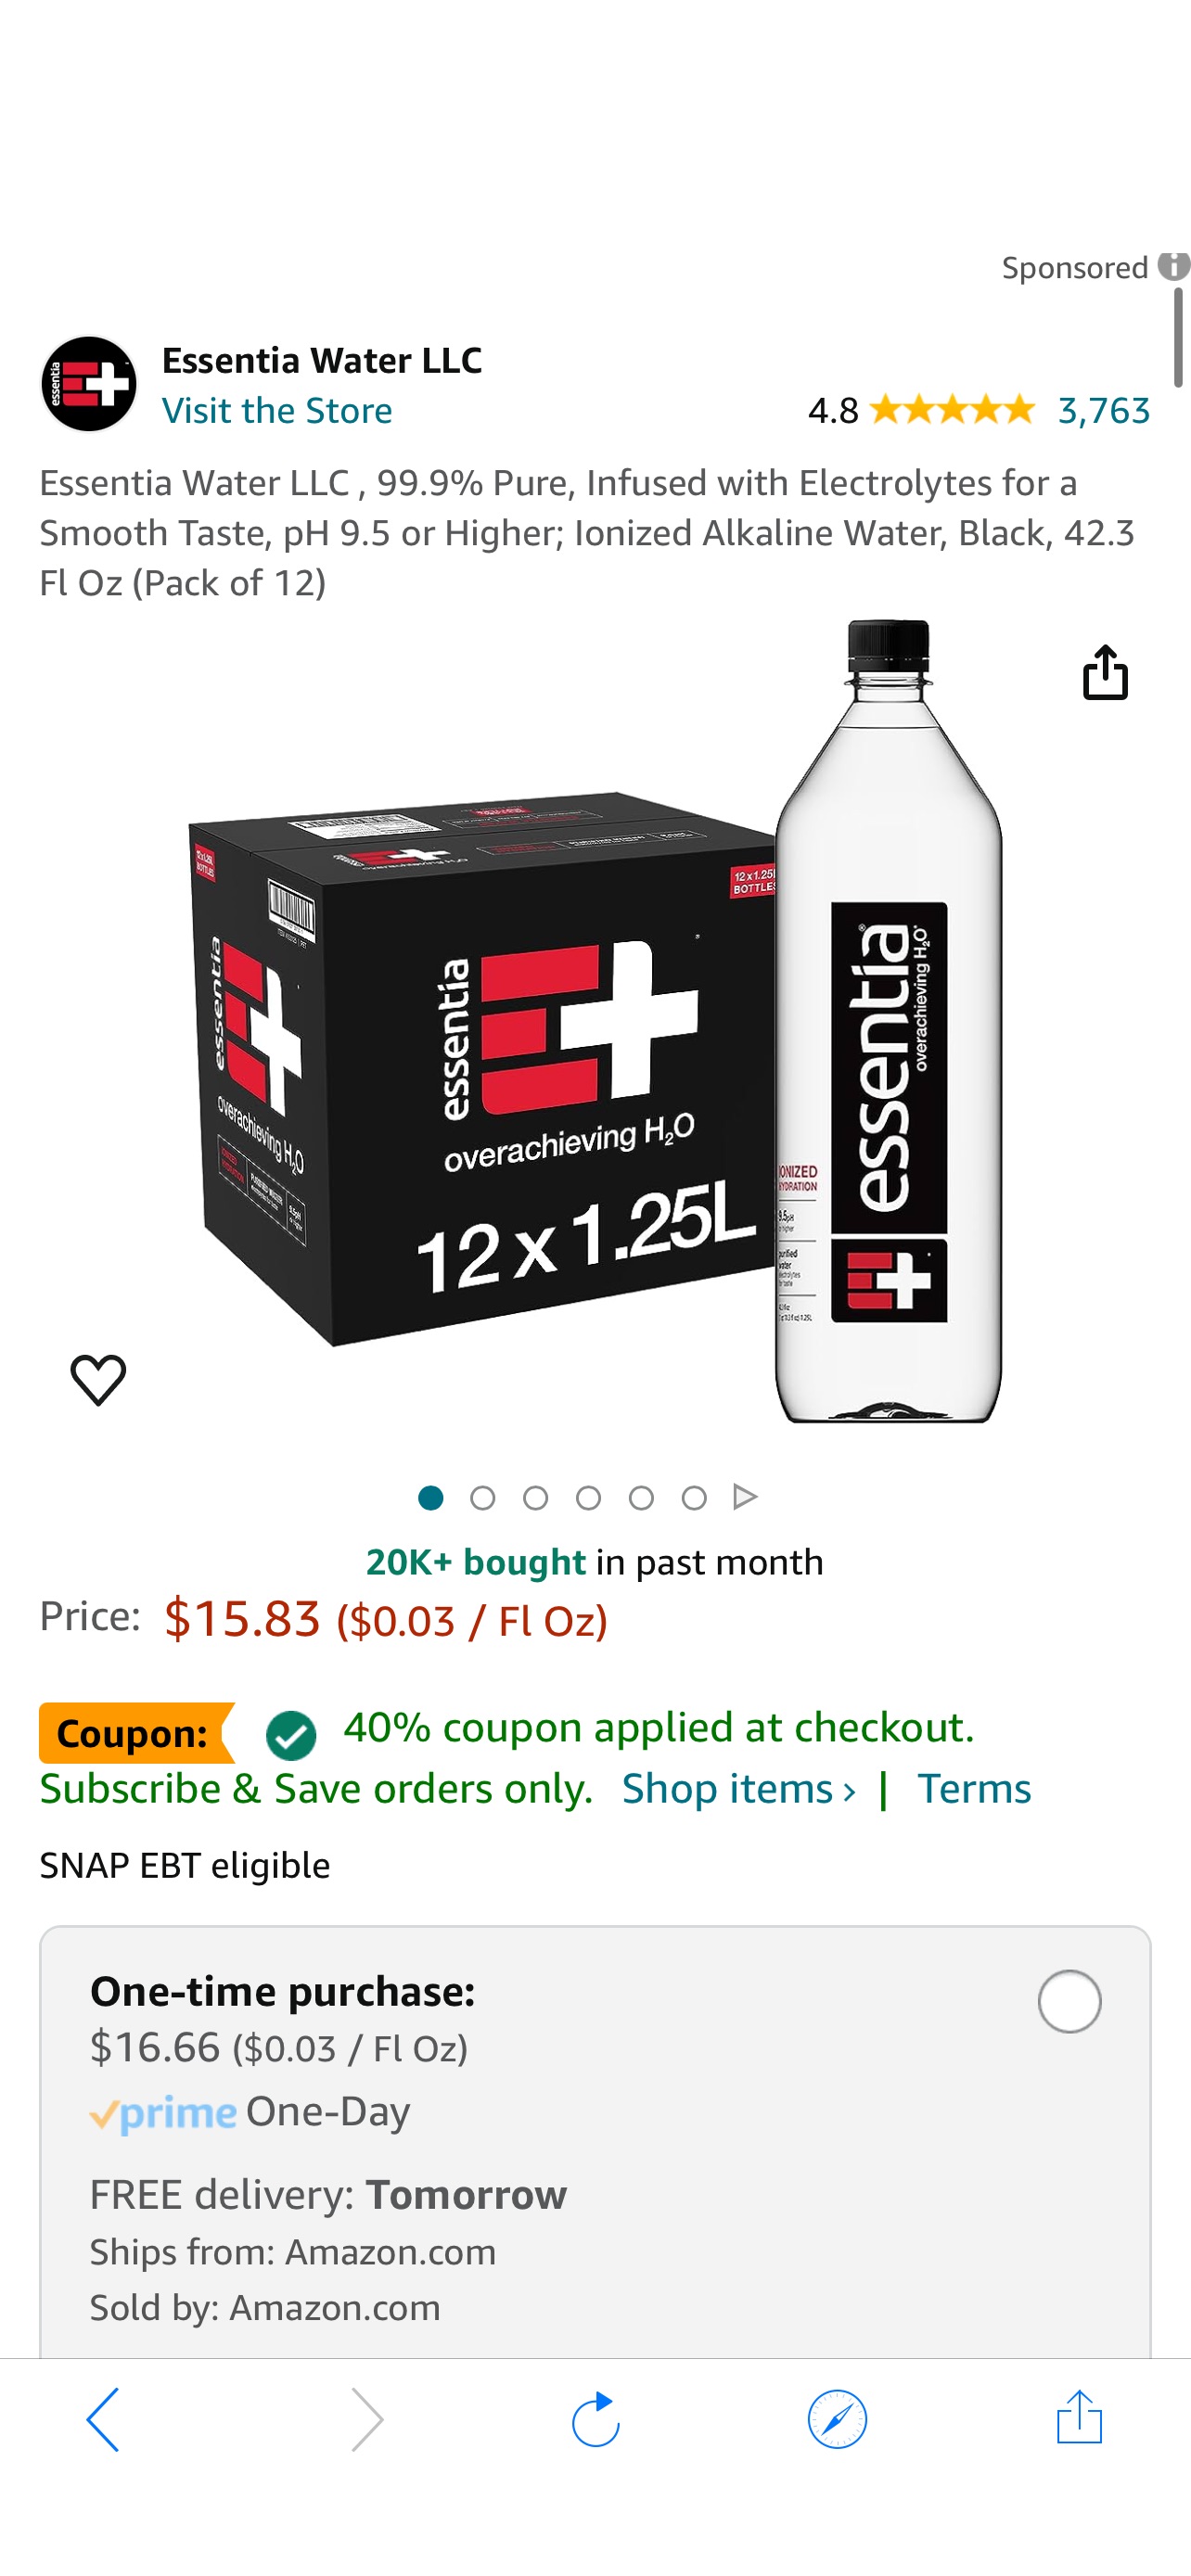 Amazon.com: Essentia Water LLC , 99.9% Pure, Infused with Electrolytes for a Smooth Taste, pH 9.5 or Higher; Ionized Alkaline Water, Black, 42.3 Fl Oz (Pack of 12) 离子水